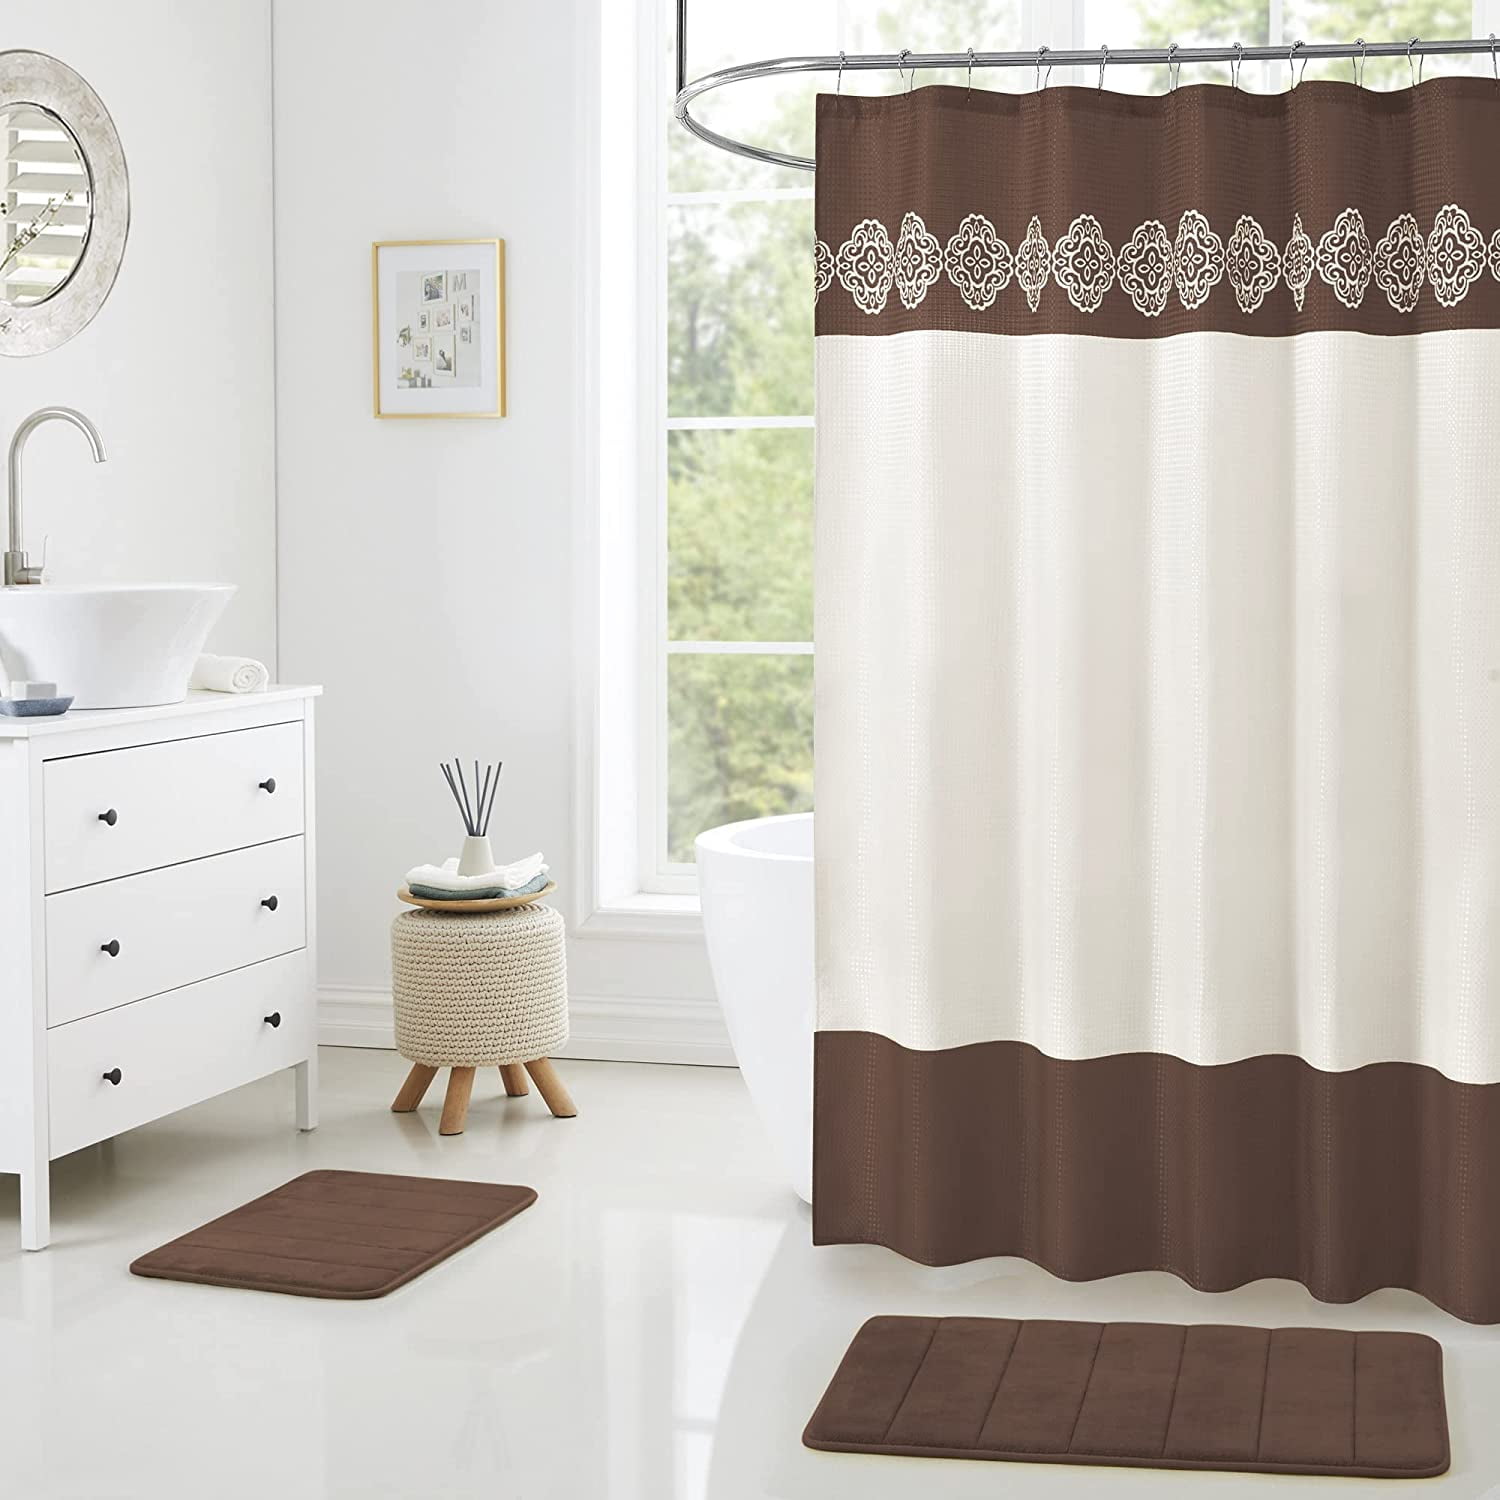 15 Piece Bathroom Shower Curtain Set with Matching Memory Foam Bath Rugs. 2  Solid Grey Beige Color Modern Design None-Slip Bath Mats Includes12 Roller  Ball Hooks Style Carrie (Gray) - Walmart.com